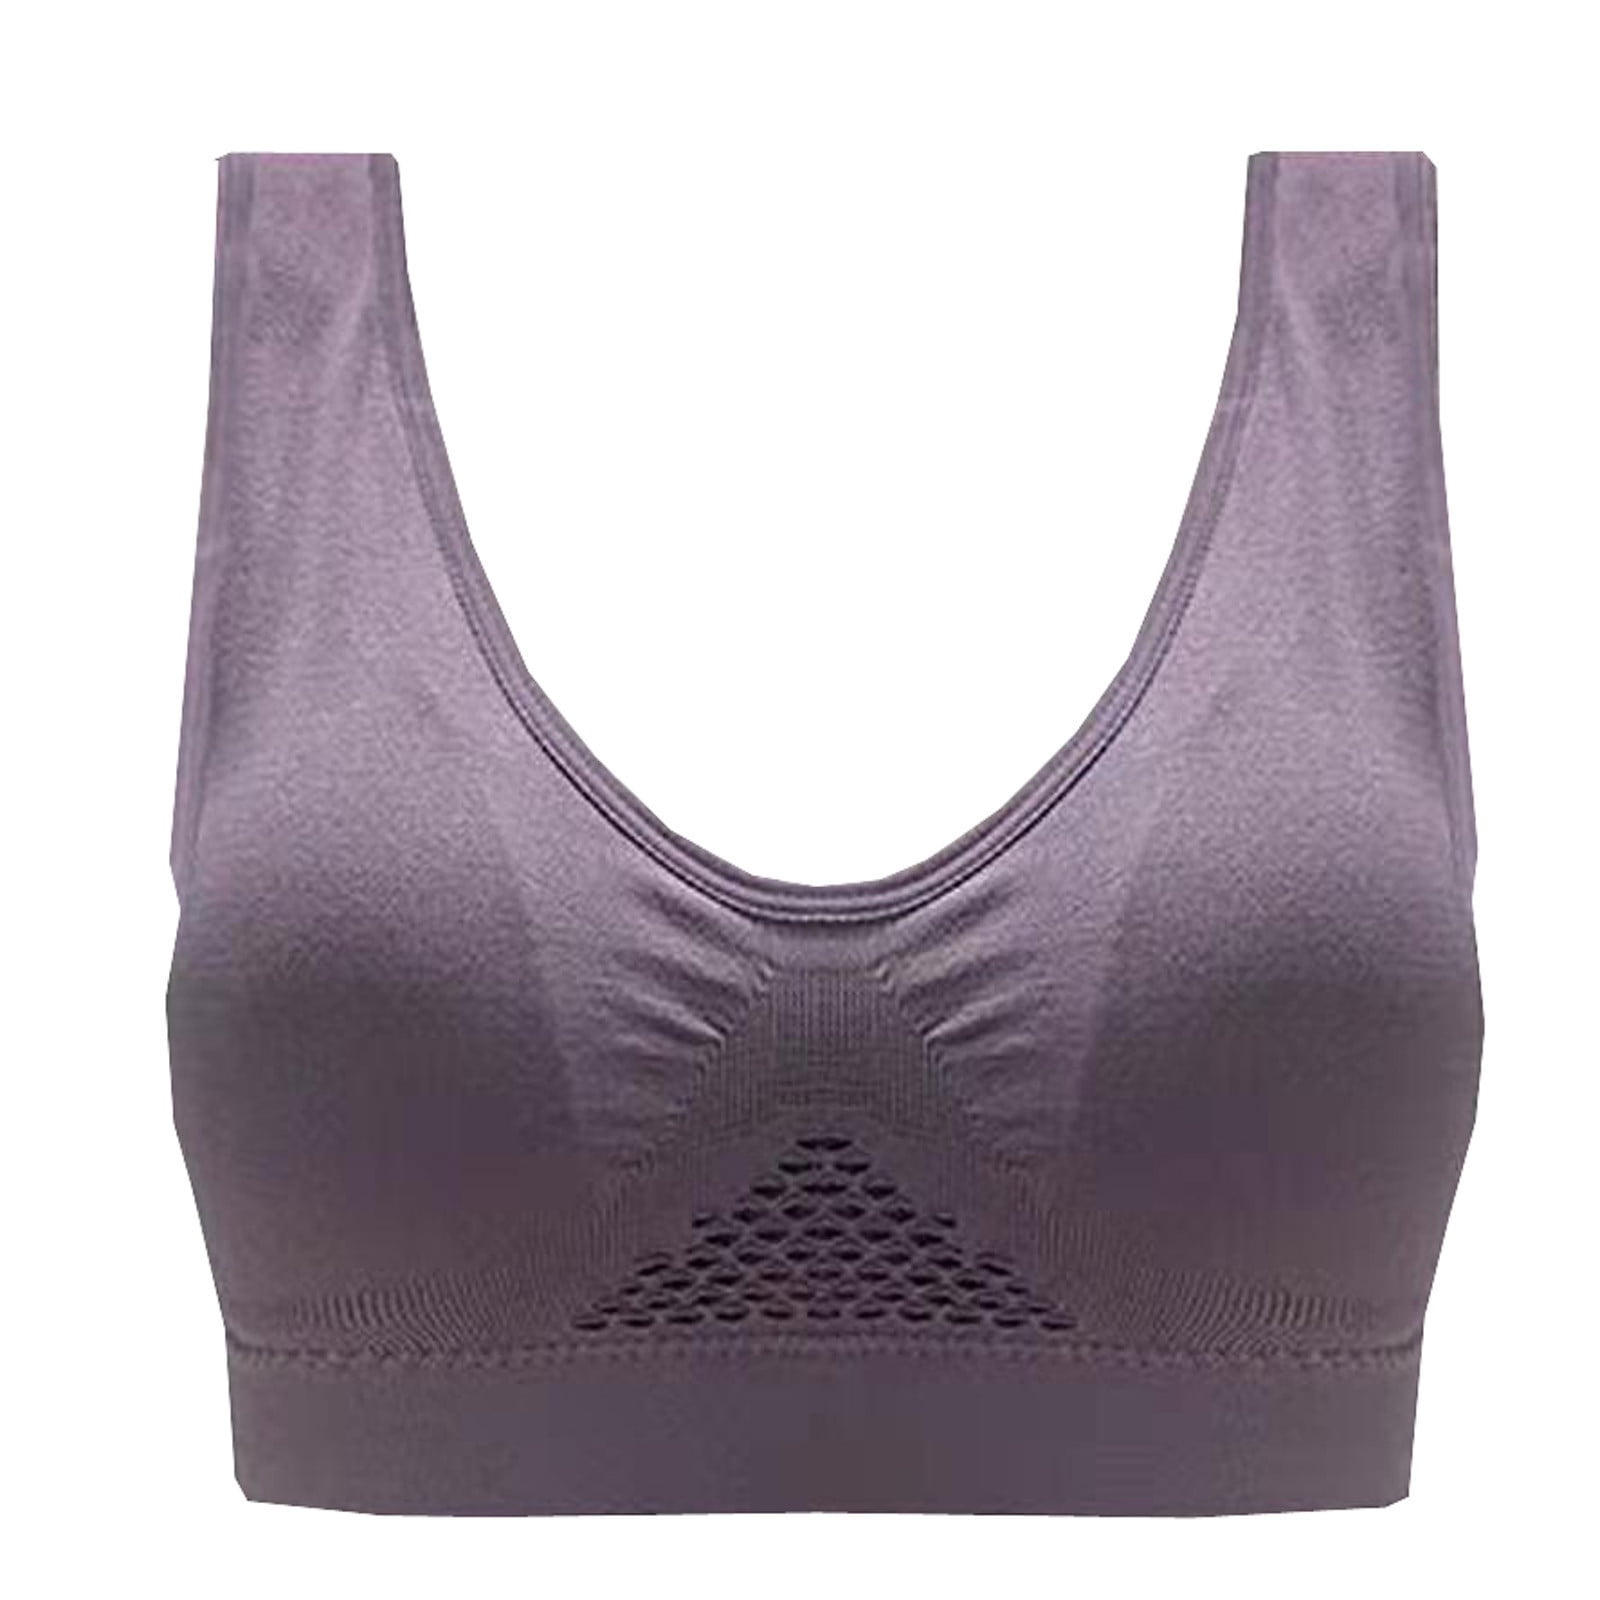 Hfyihgf On Clearance Mesh U Back High-Impact Sports Bras for Womens Plus  Size Comfort Seamless Pullover Bra with Built-In Cups(Purple,XL)